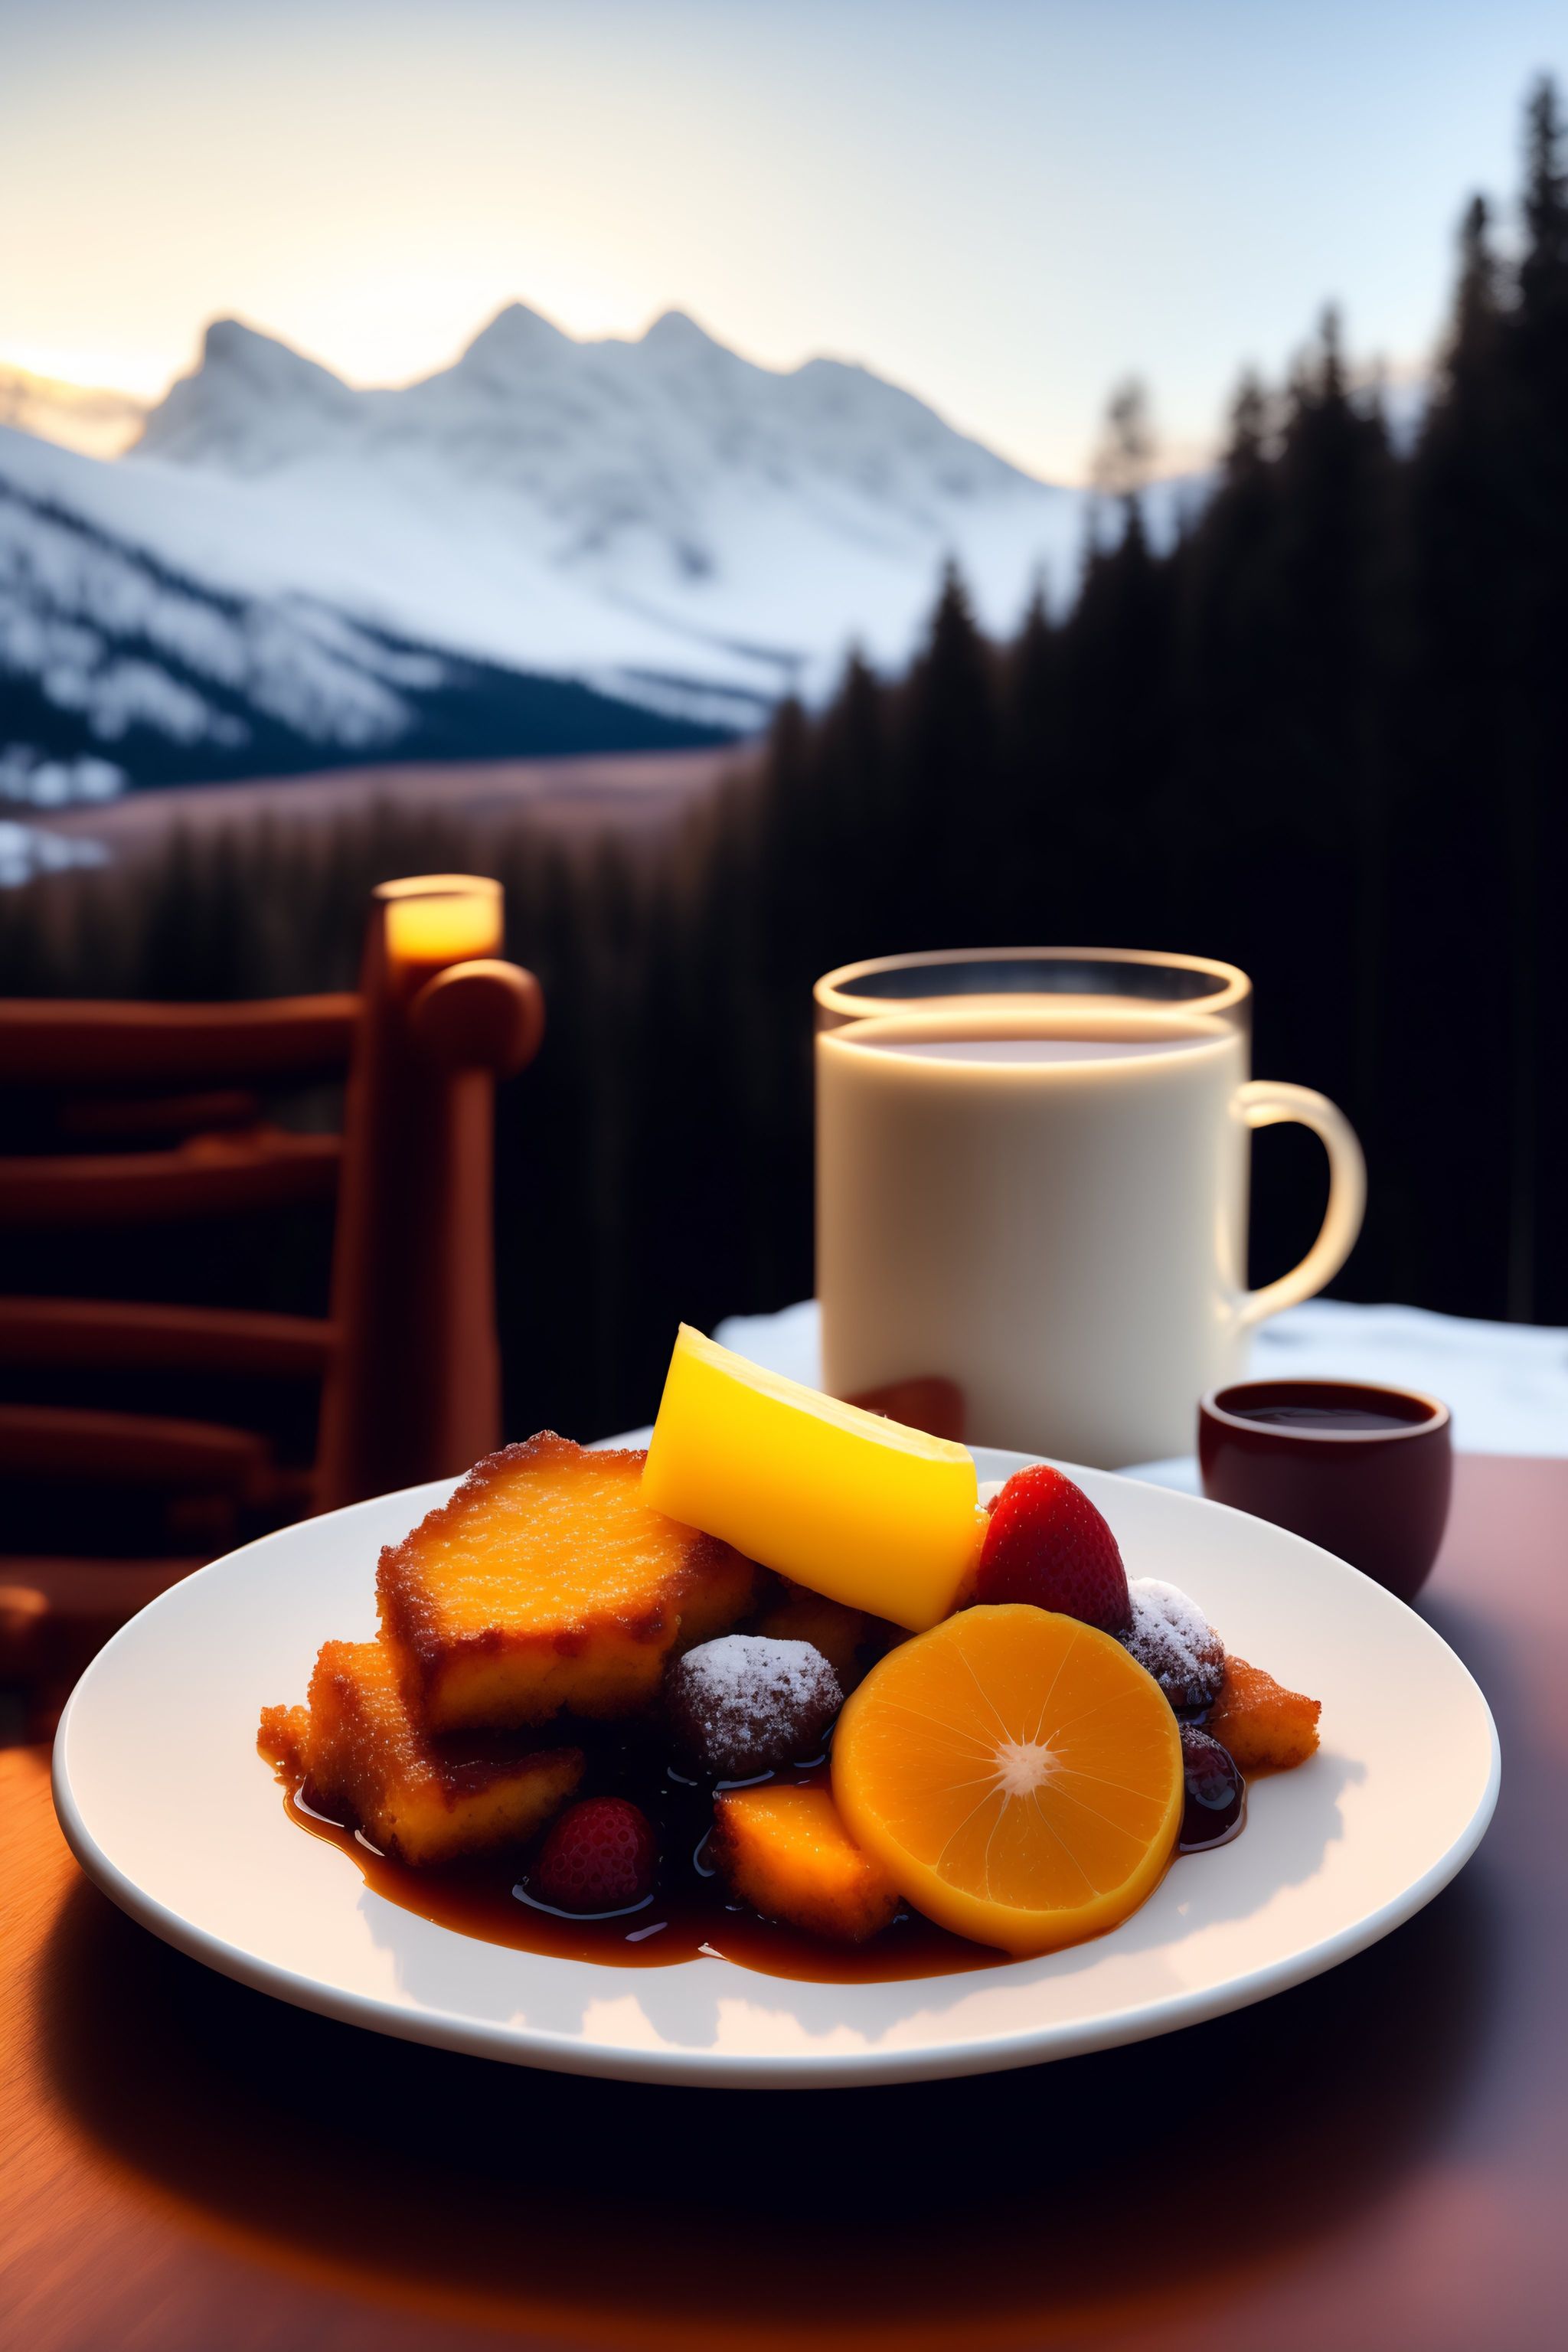 Kaiserschmarrn - one of 10 Classic Alpine Winter Recipes from Ski Resorts in France, Switzerland, Austria, and the Bavarian Alps